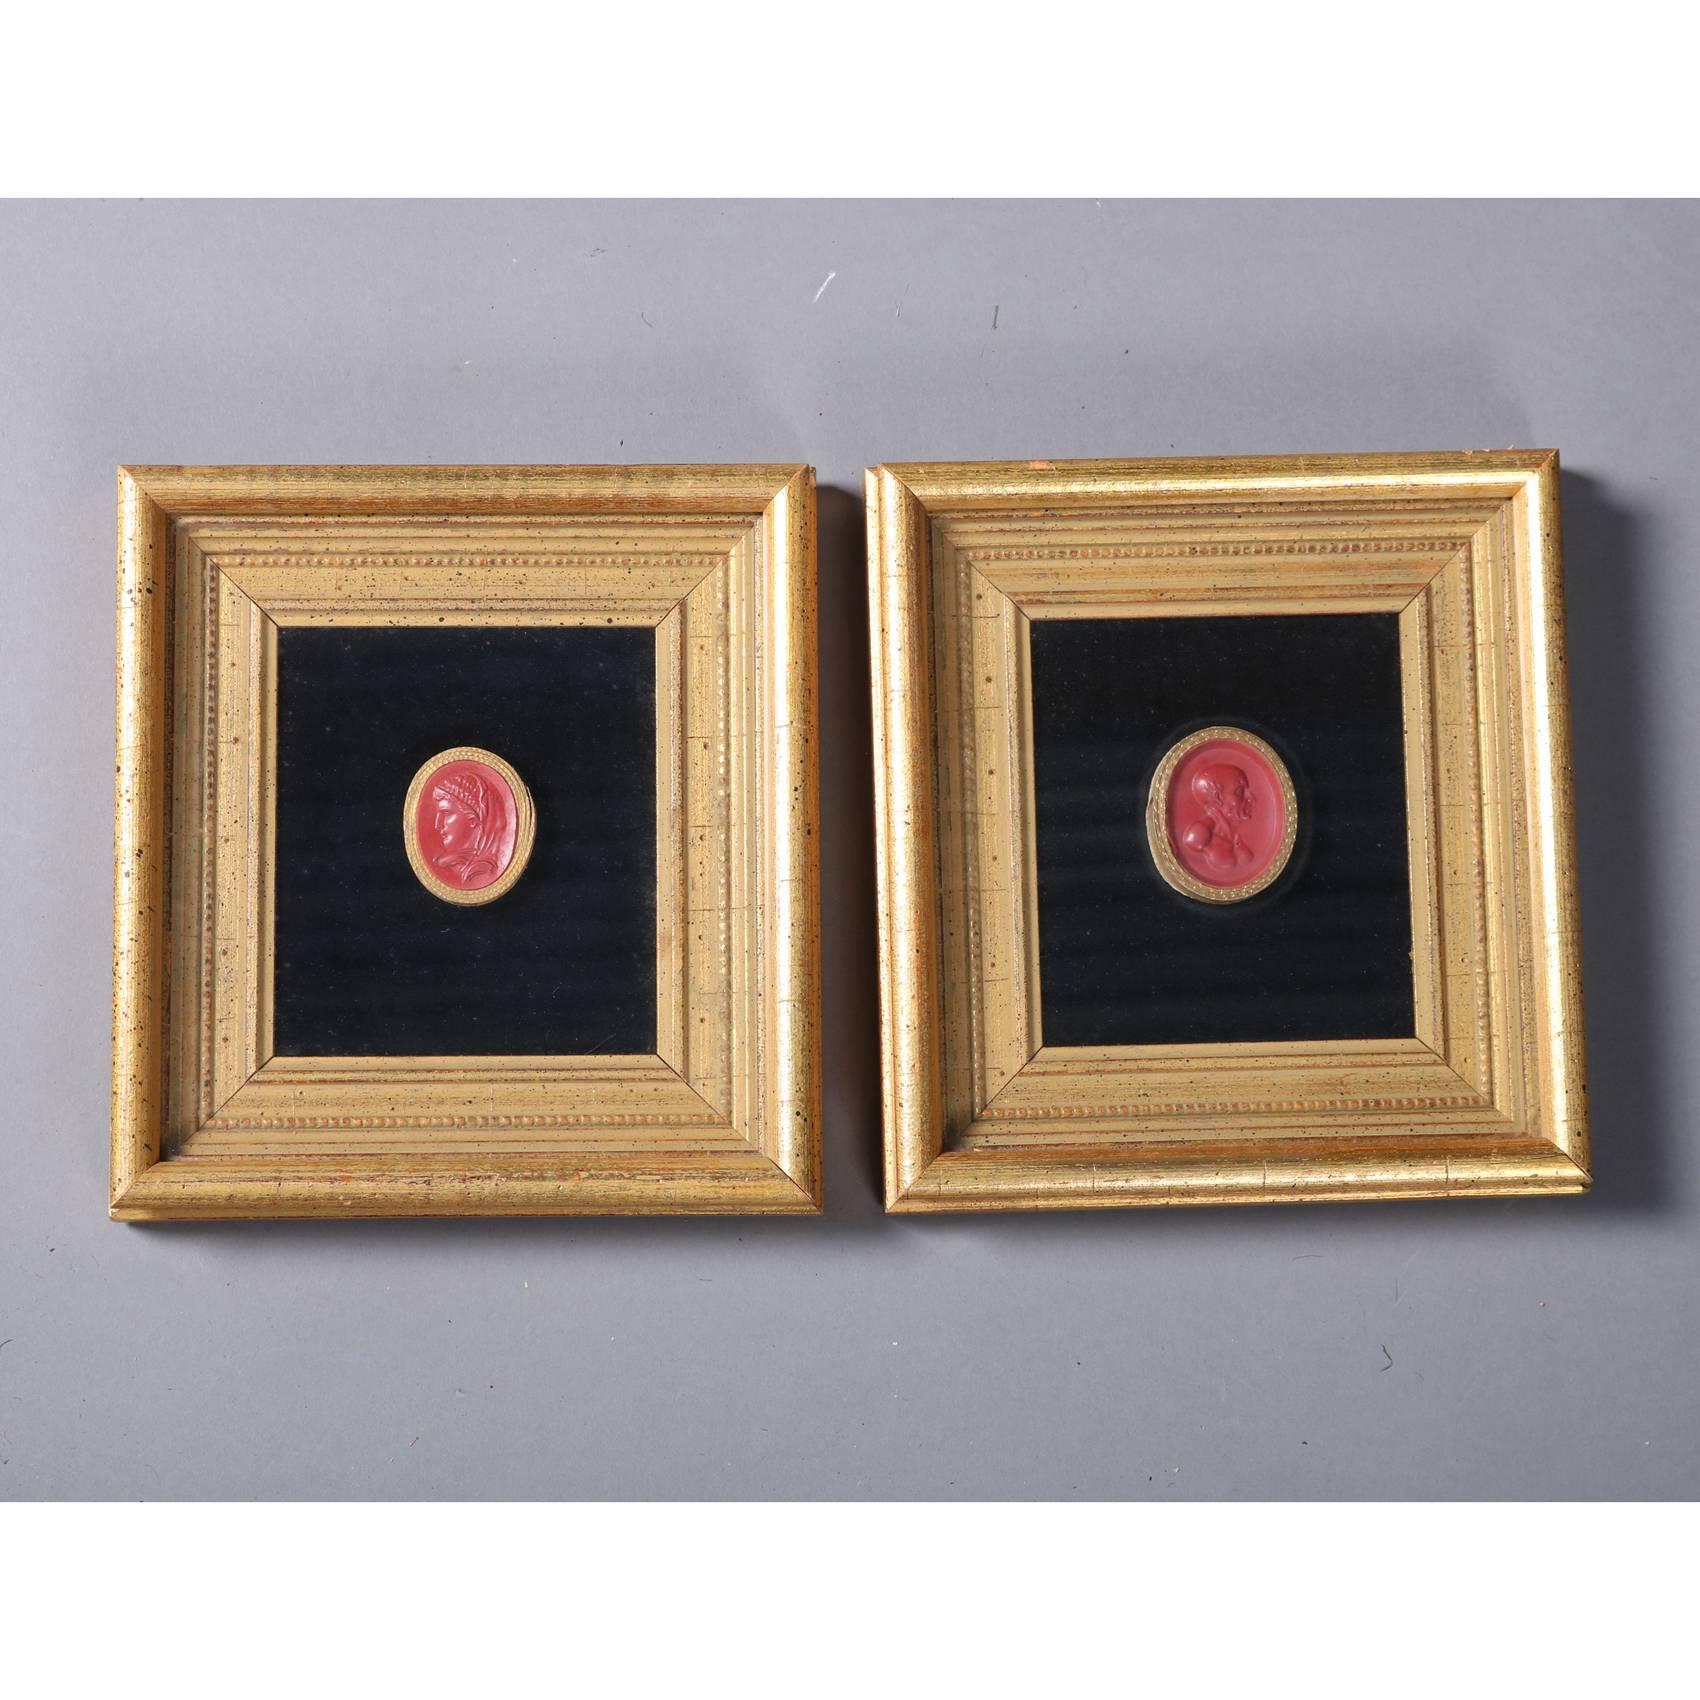 Pair of Miniature Classical Wax Portraits in Giltwood Frames, 19th Century 3